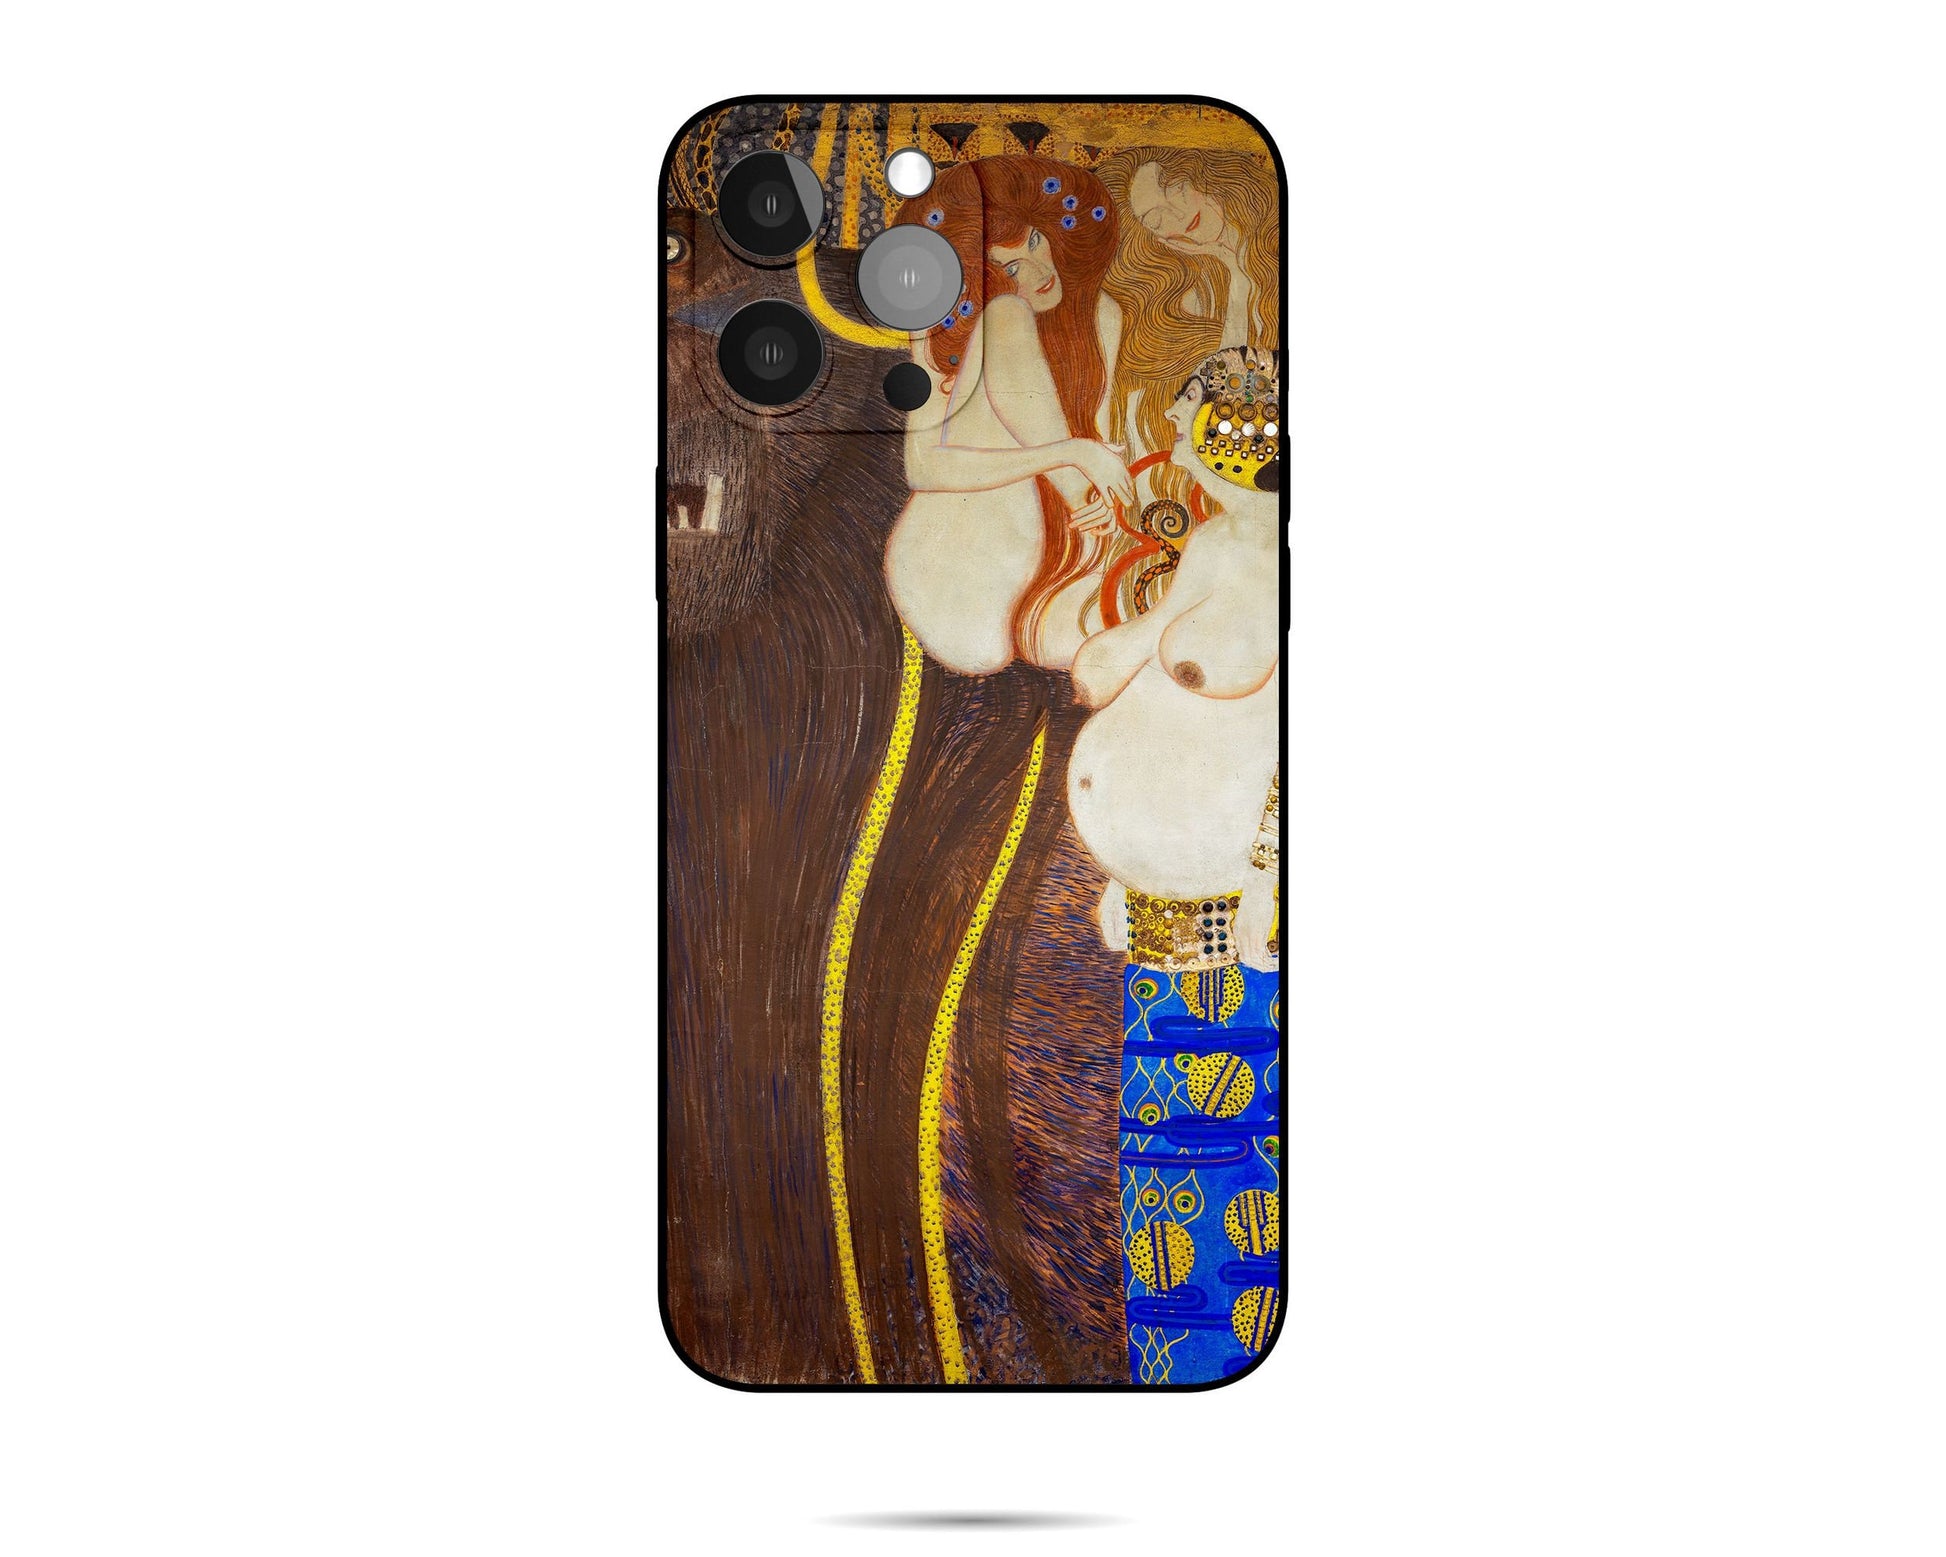 Iphone Case Of Gustav Klimt Painting Beethoven Frieze-The Hostile Powers, Iphone 12 Pro Case, Iphone 7 Case, Aesthetic Iphone, Gift For Her